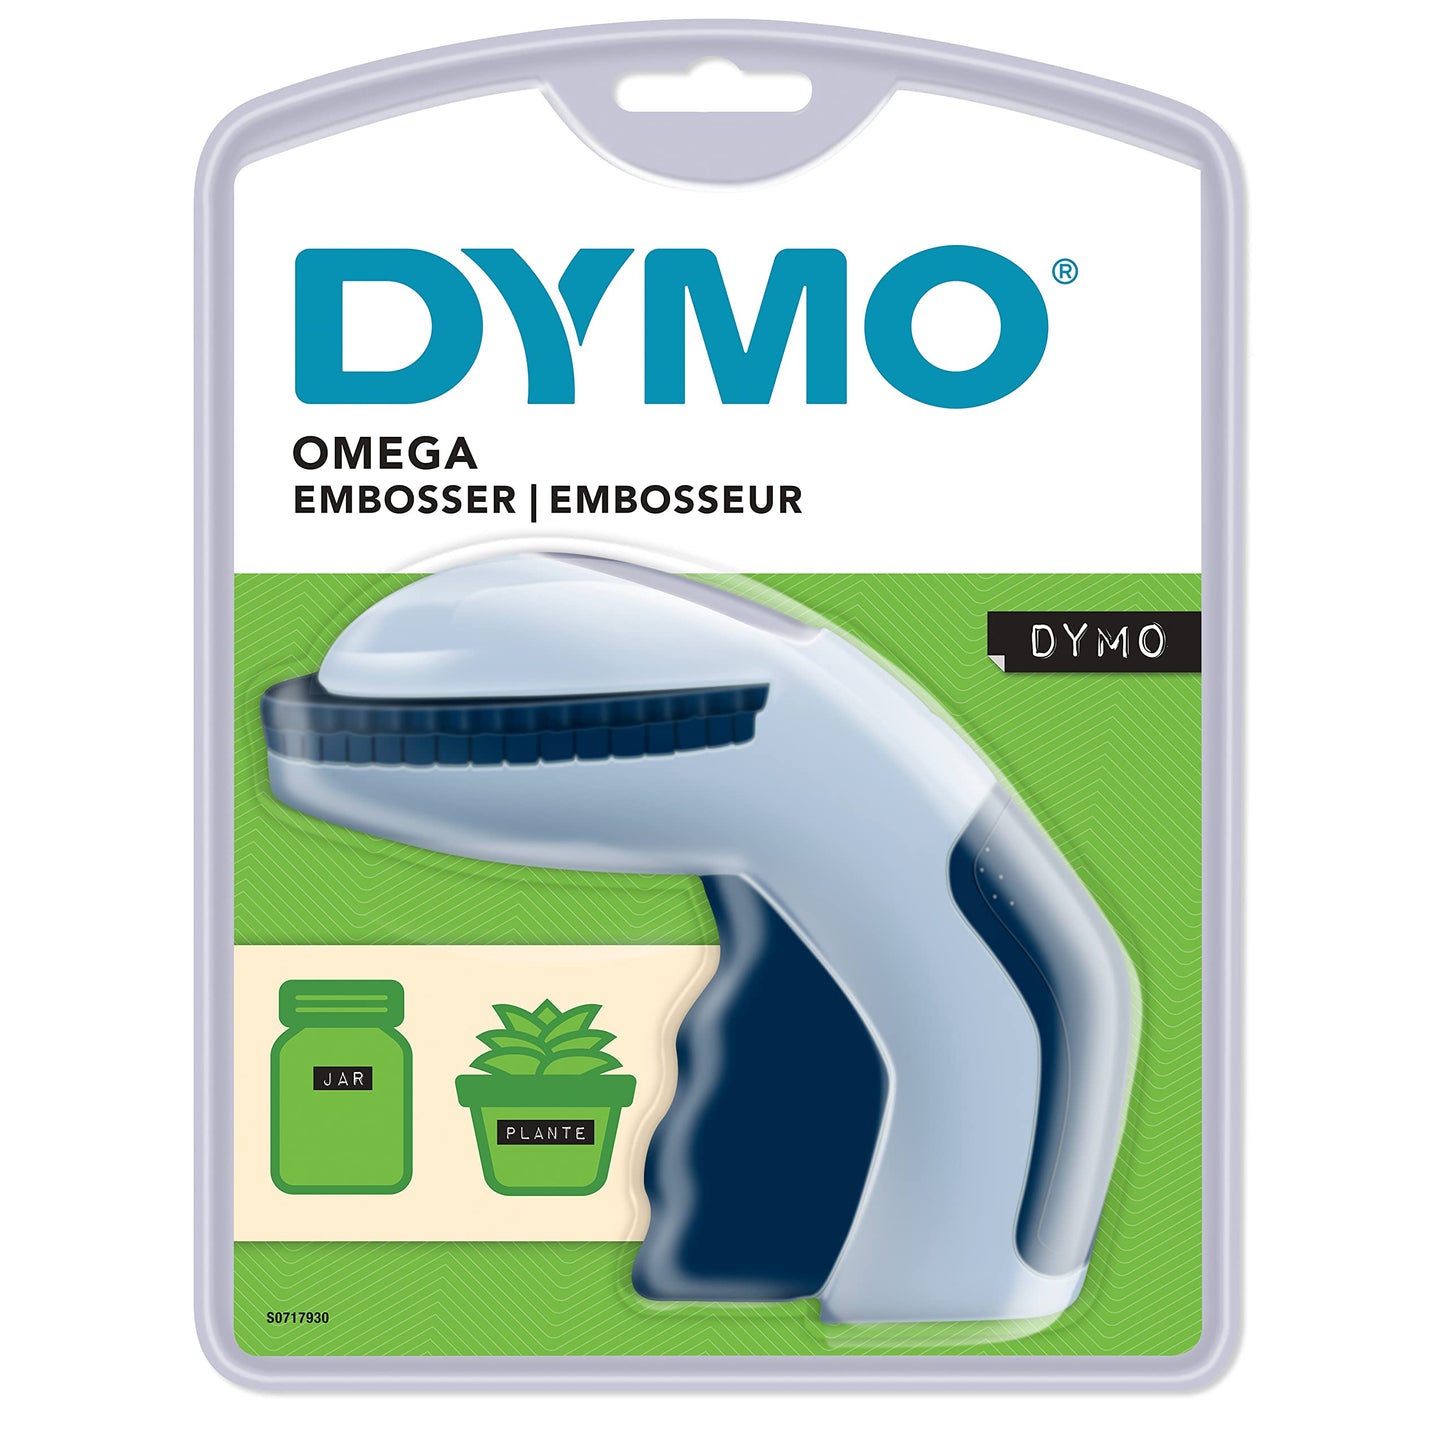 Dymo Omega, Home Embossing Label Marker Using With 3D Embossing Labels, S0717930